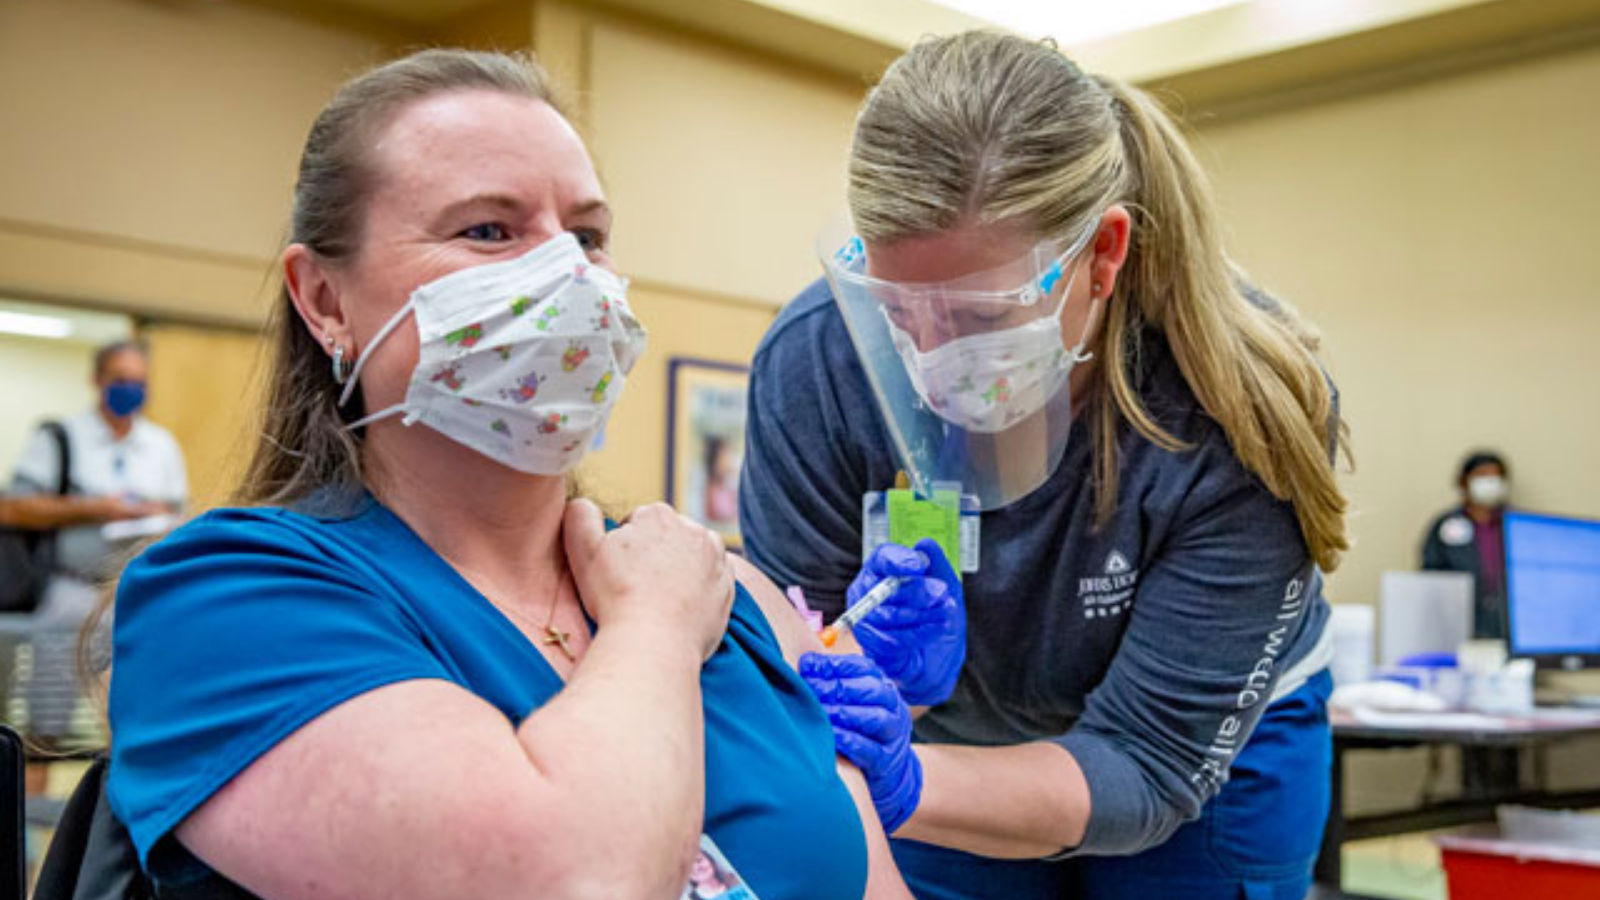 A Johns Hopkins employee receives the COVID-19 vaccine at one of the onsite vaccine locations.